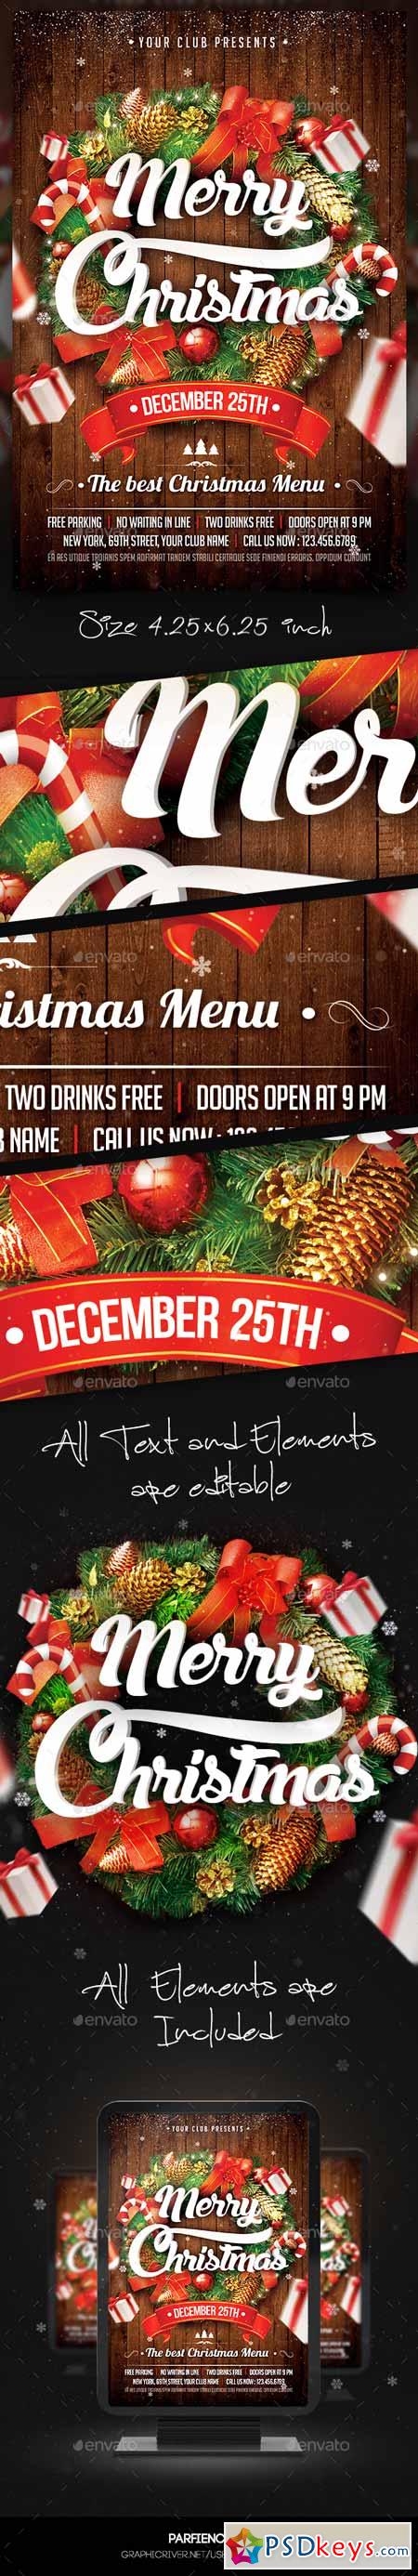 Christmas Party Flyer Template 13746216